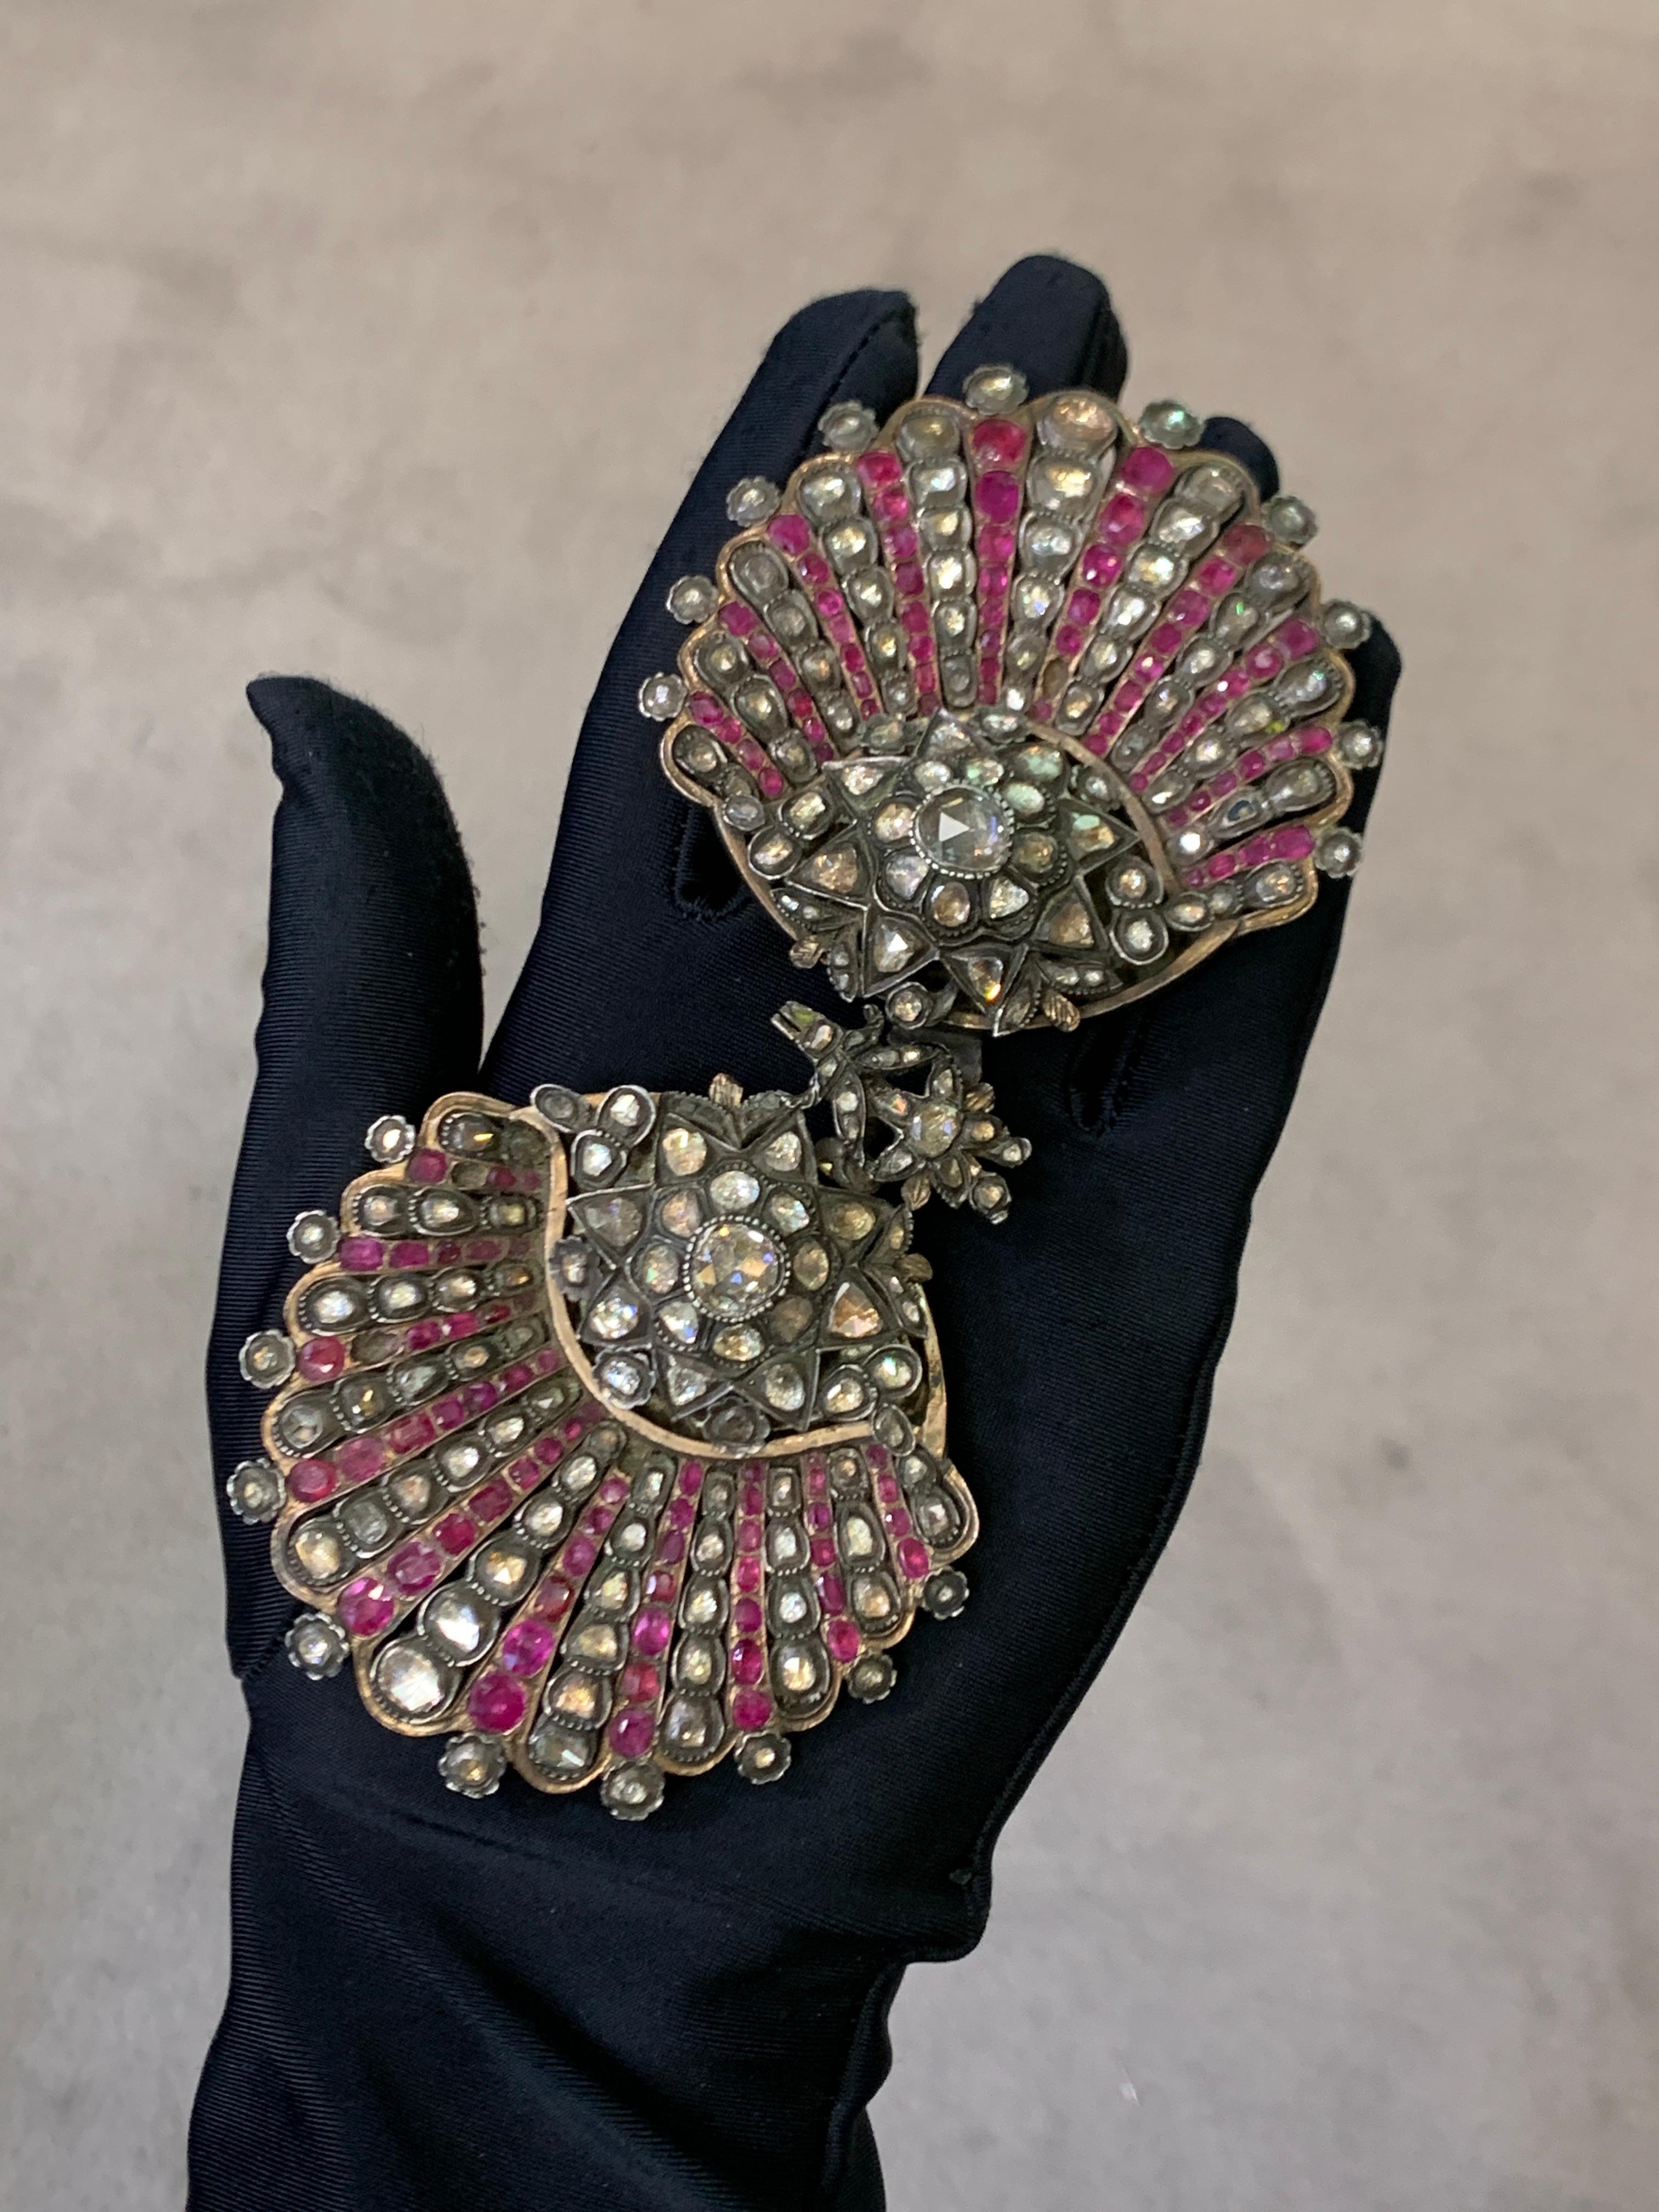 Antique Rose Cut Diamond and Ruby Belt Buckle

Made circa 1850

Approximate measurements:  6